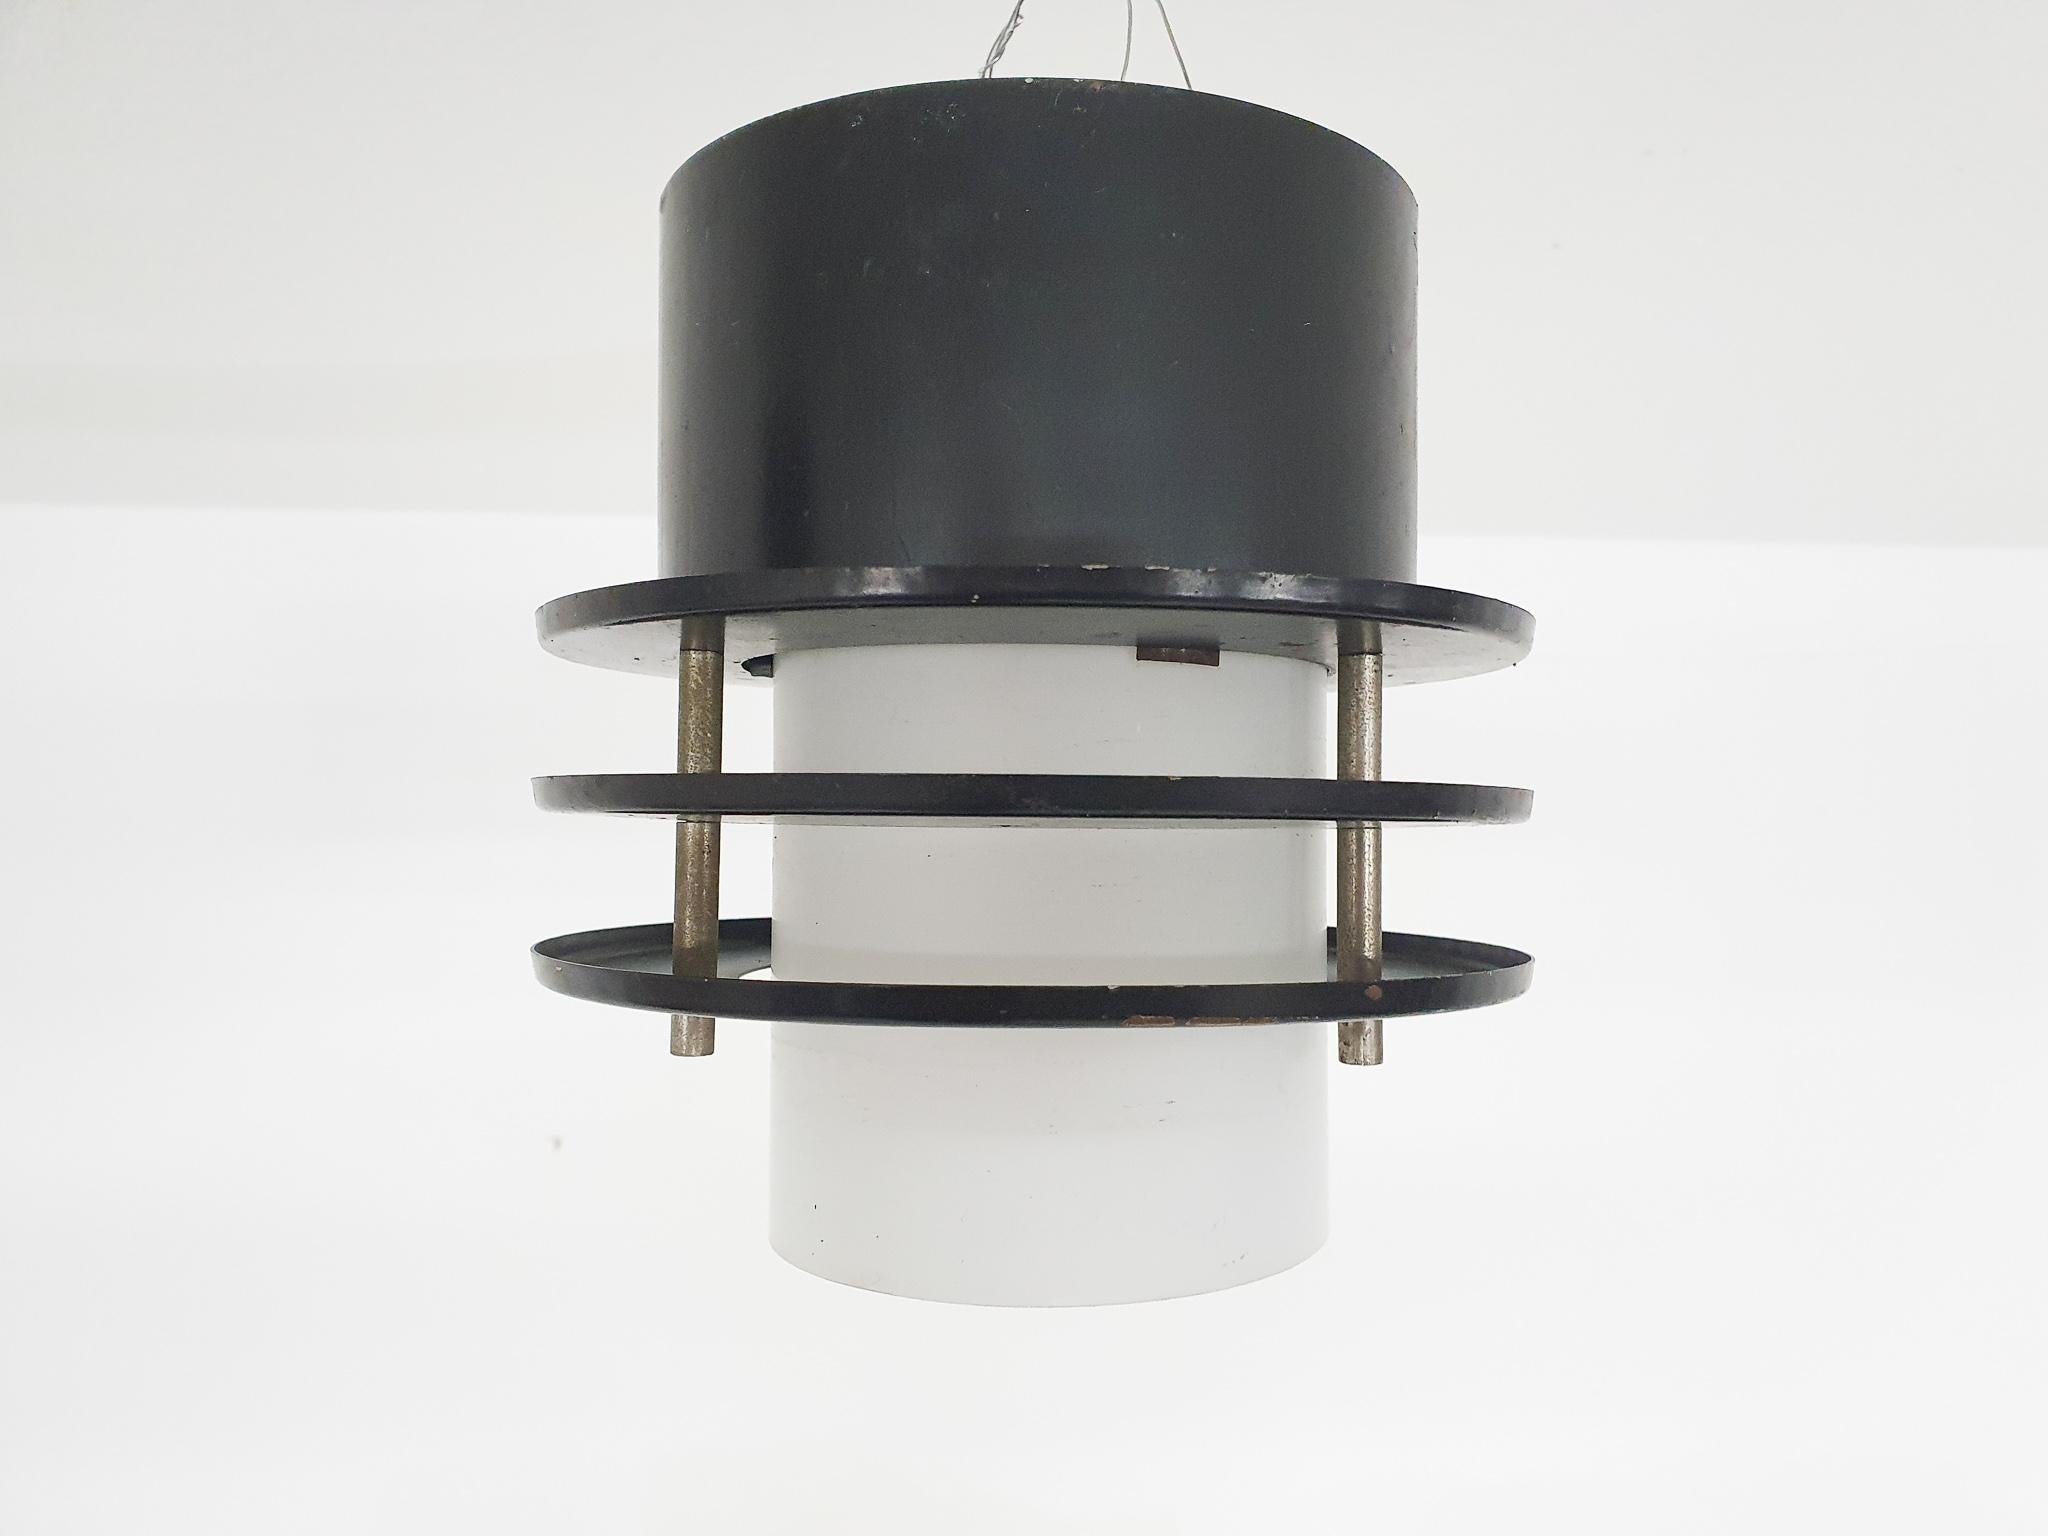 Set of two minimalistic ceiling lights, The Netherlands 1960s.

Black metal ceiling lights with white milk glass inside.